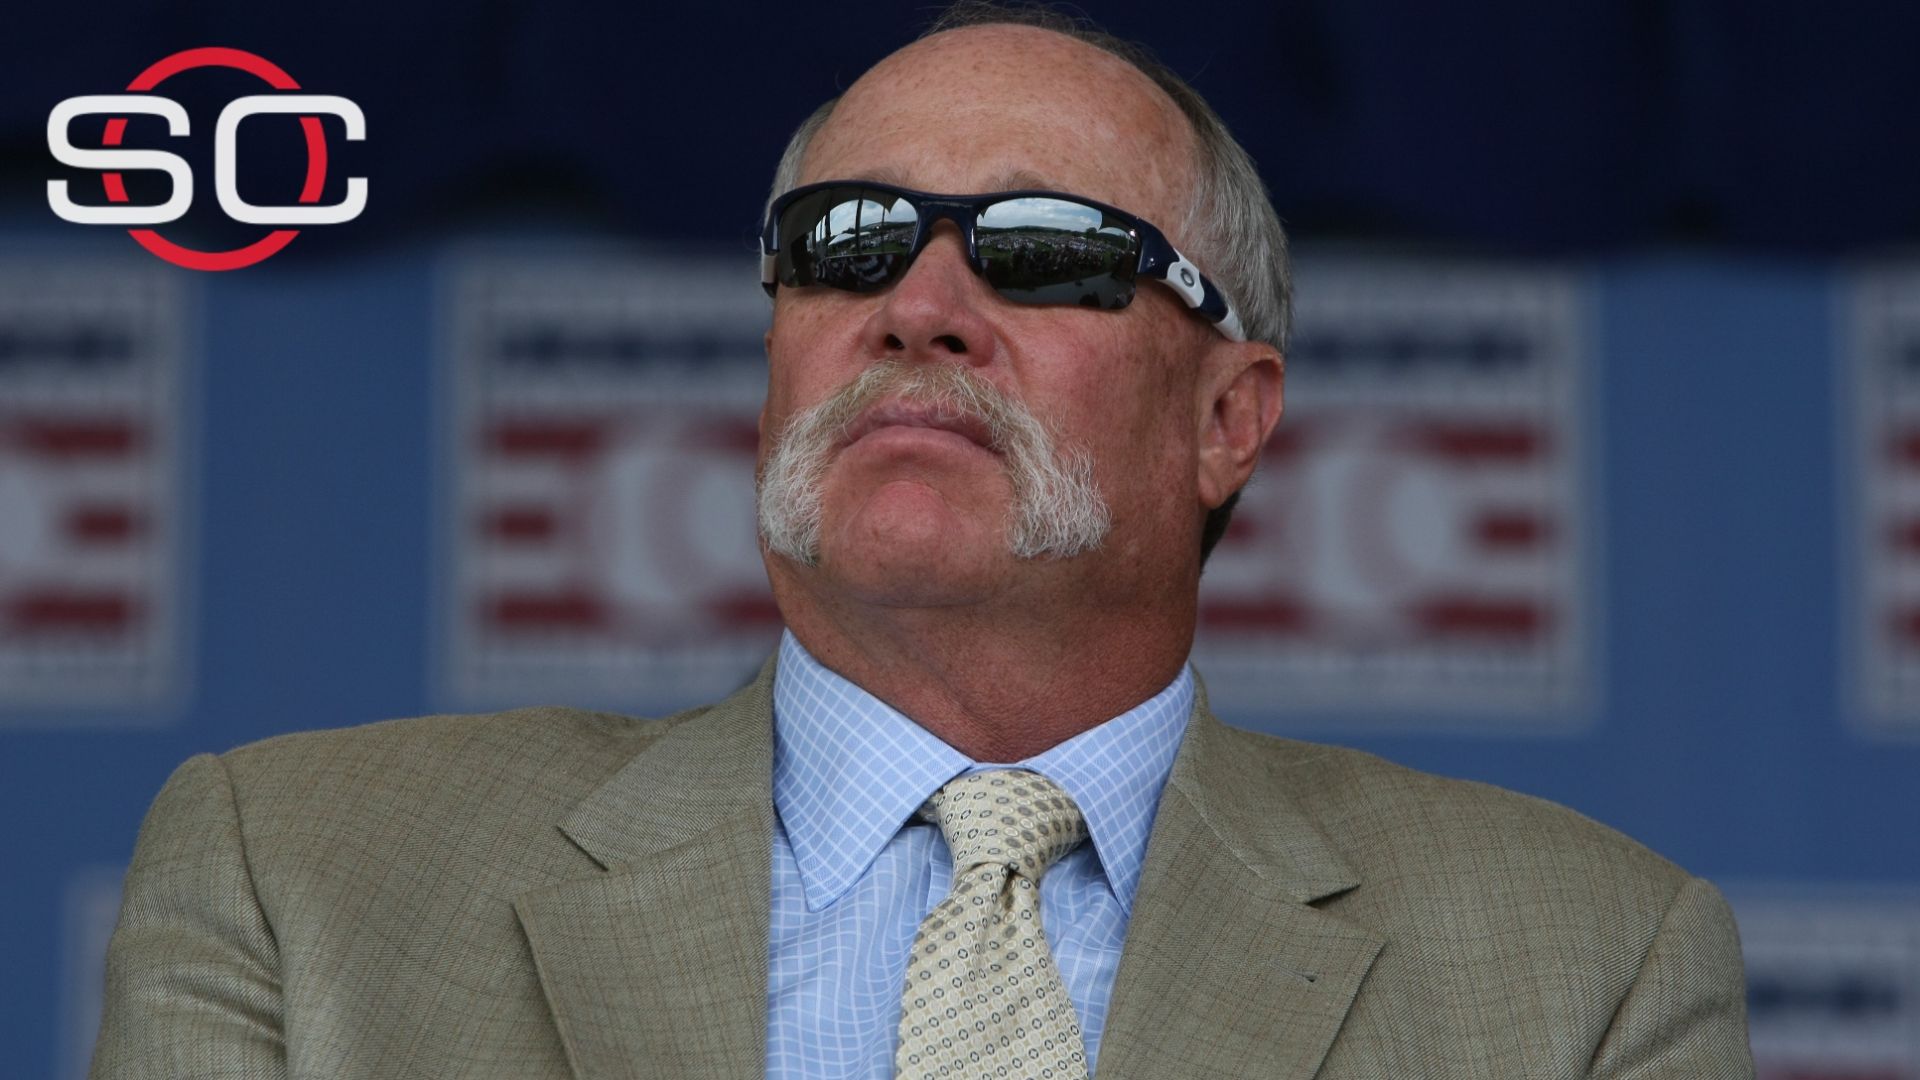 Goose Gossage rips Bautista, current state of baseball